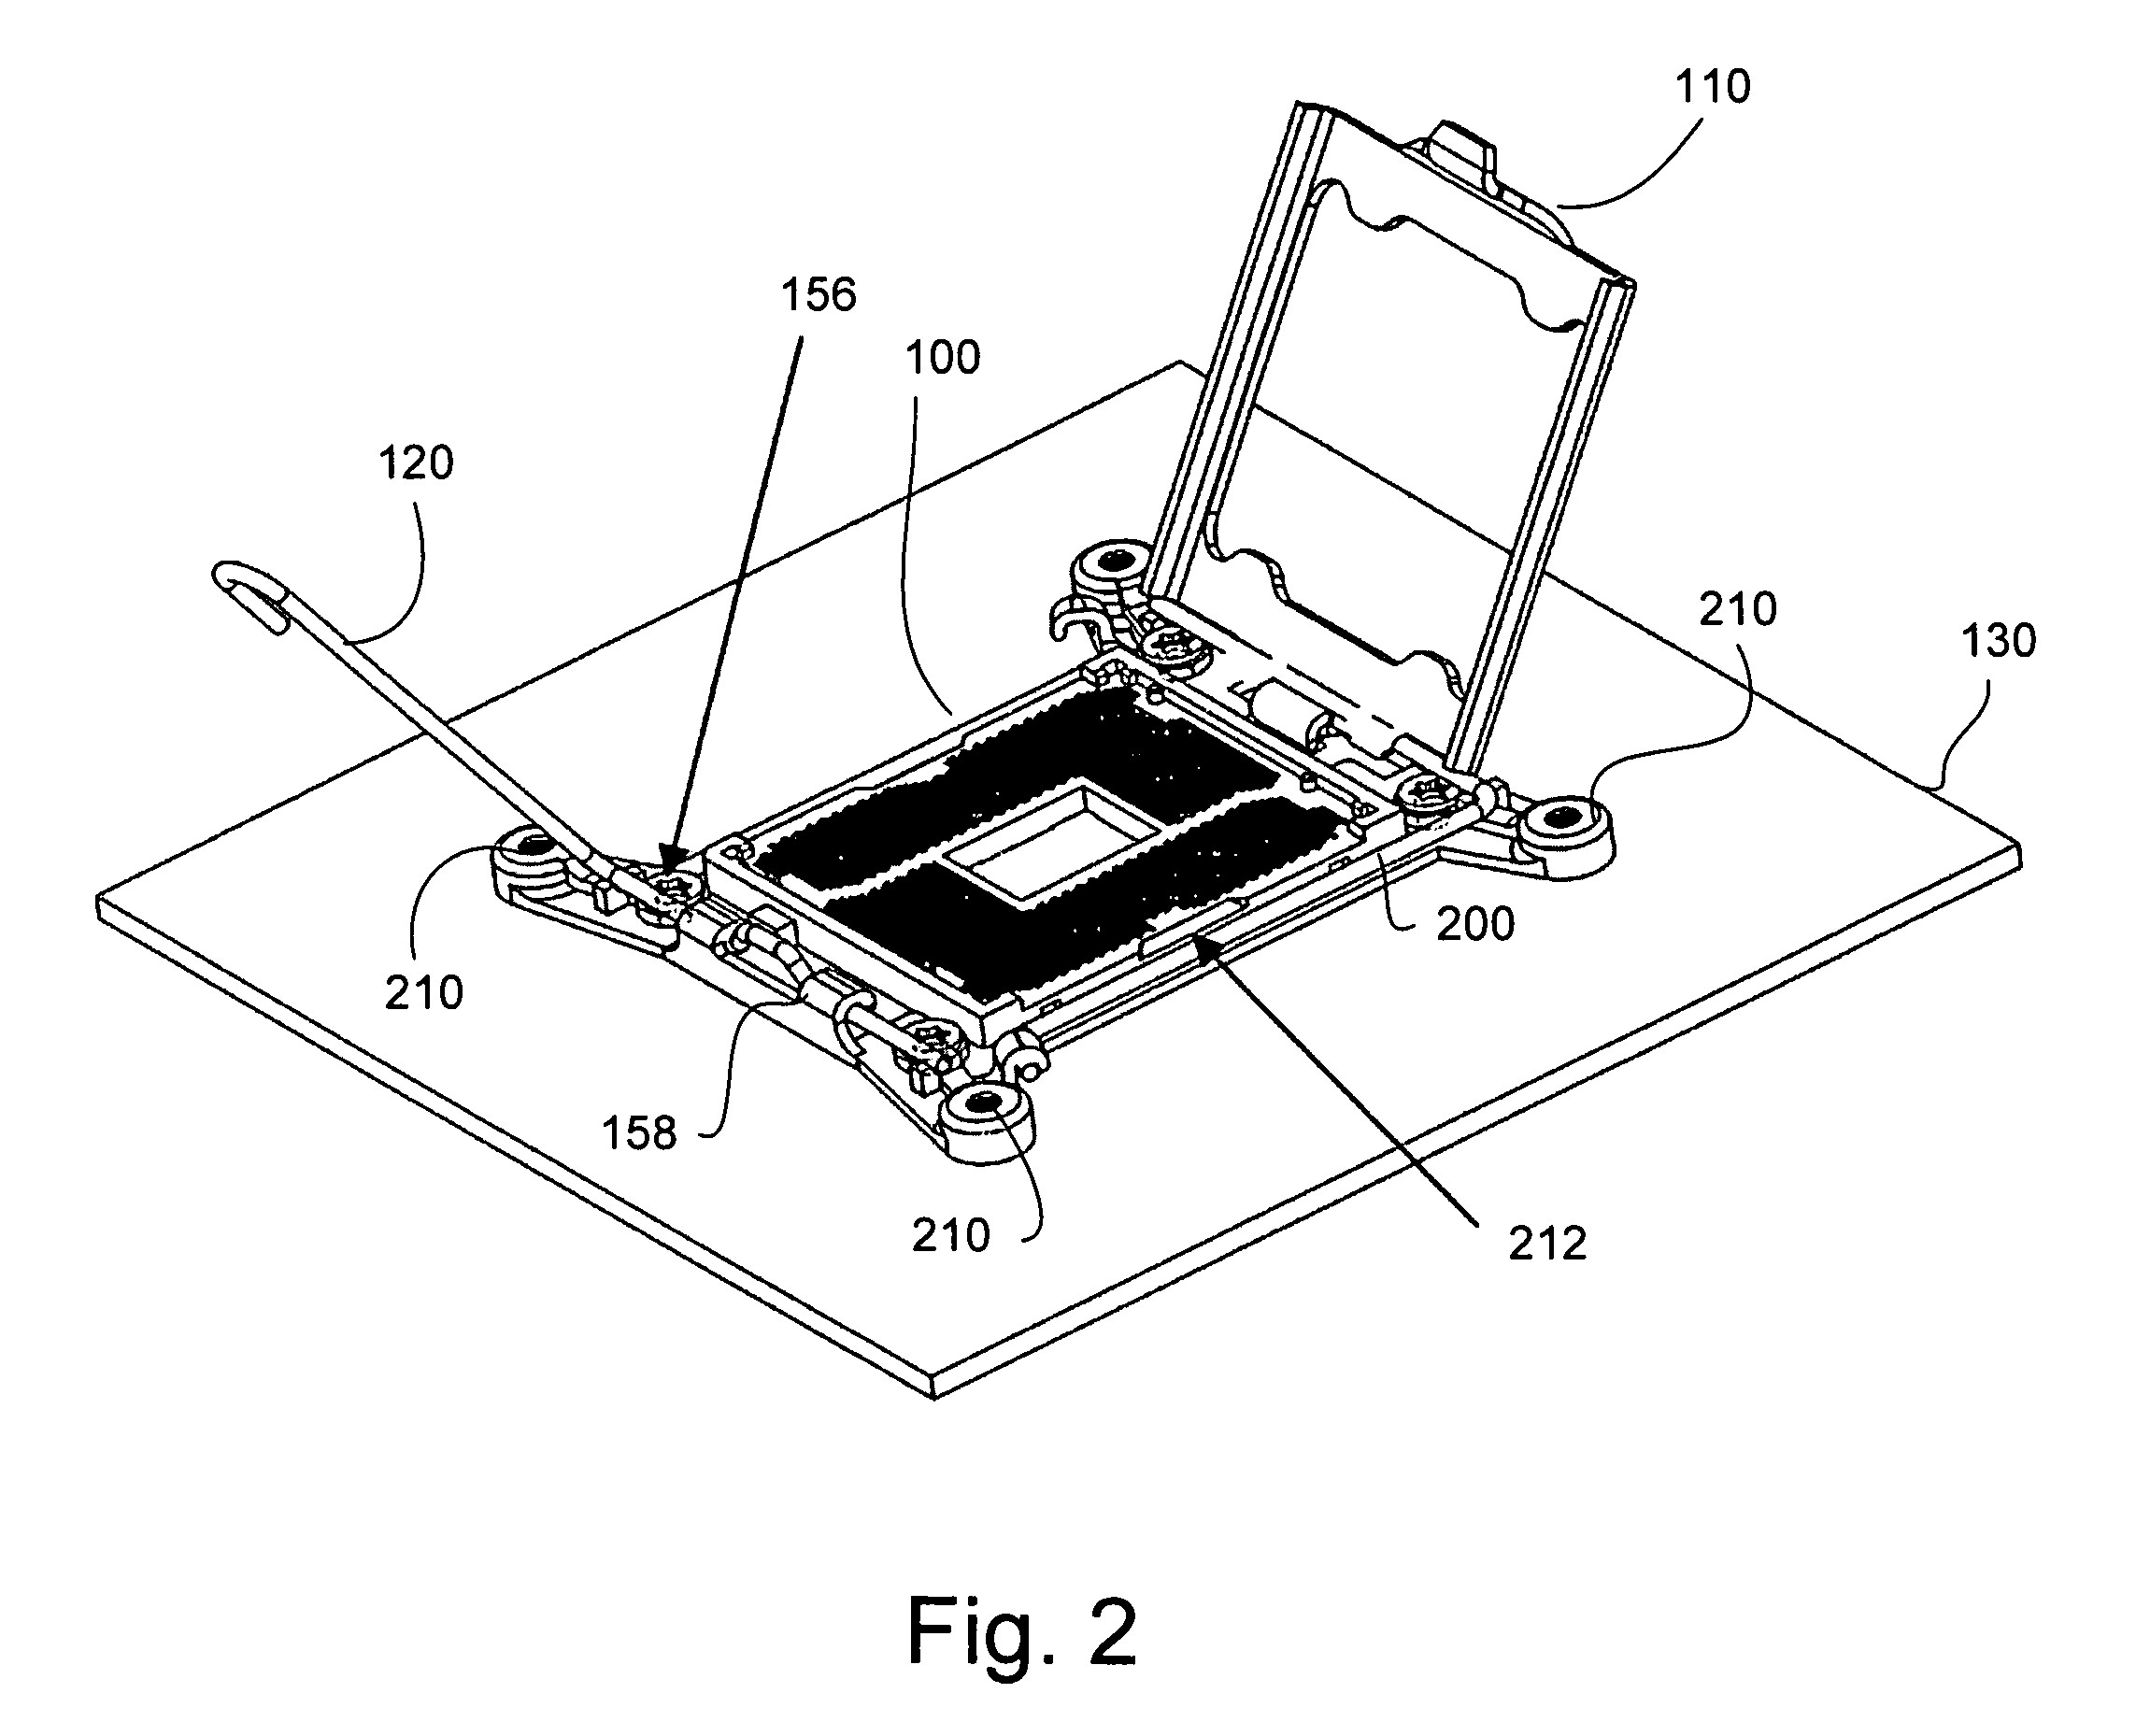 Unified retention mechanism for CPU/socket loading and thermal solution attach